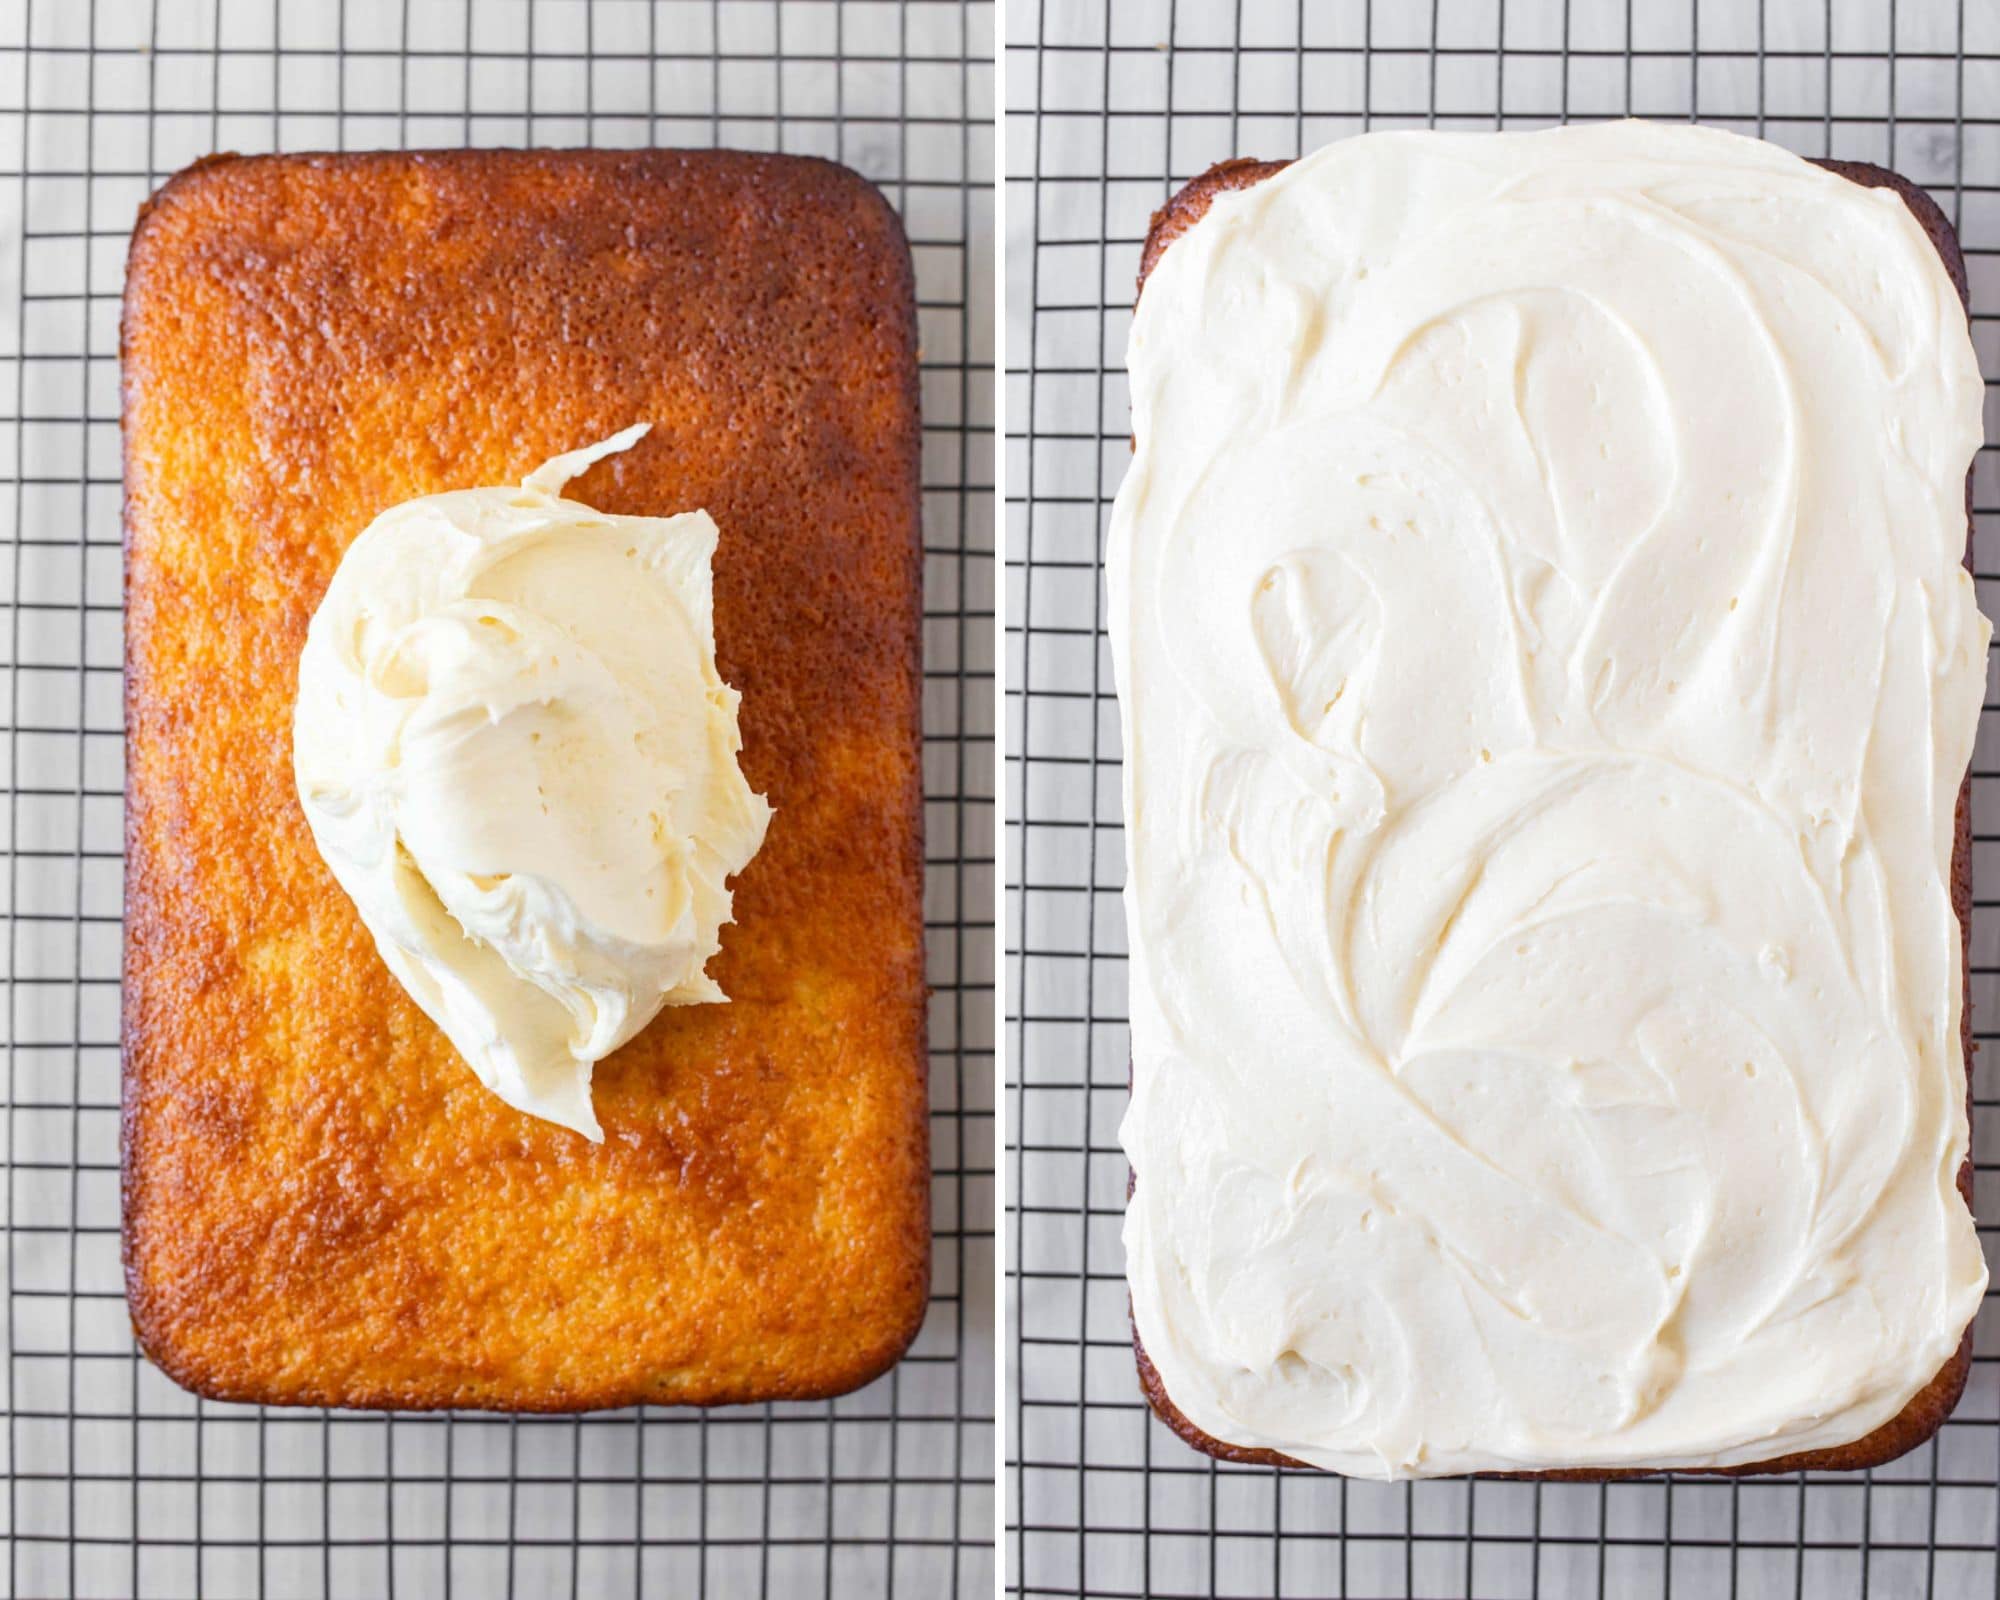 Spreading cream cheese frosting over baked pineapple cake.